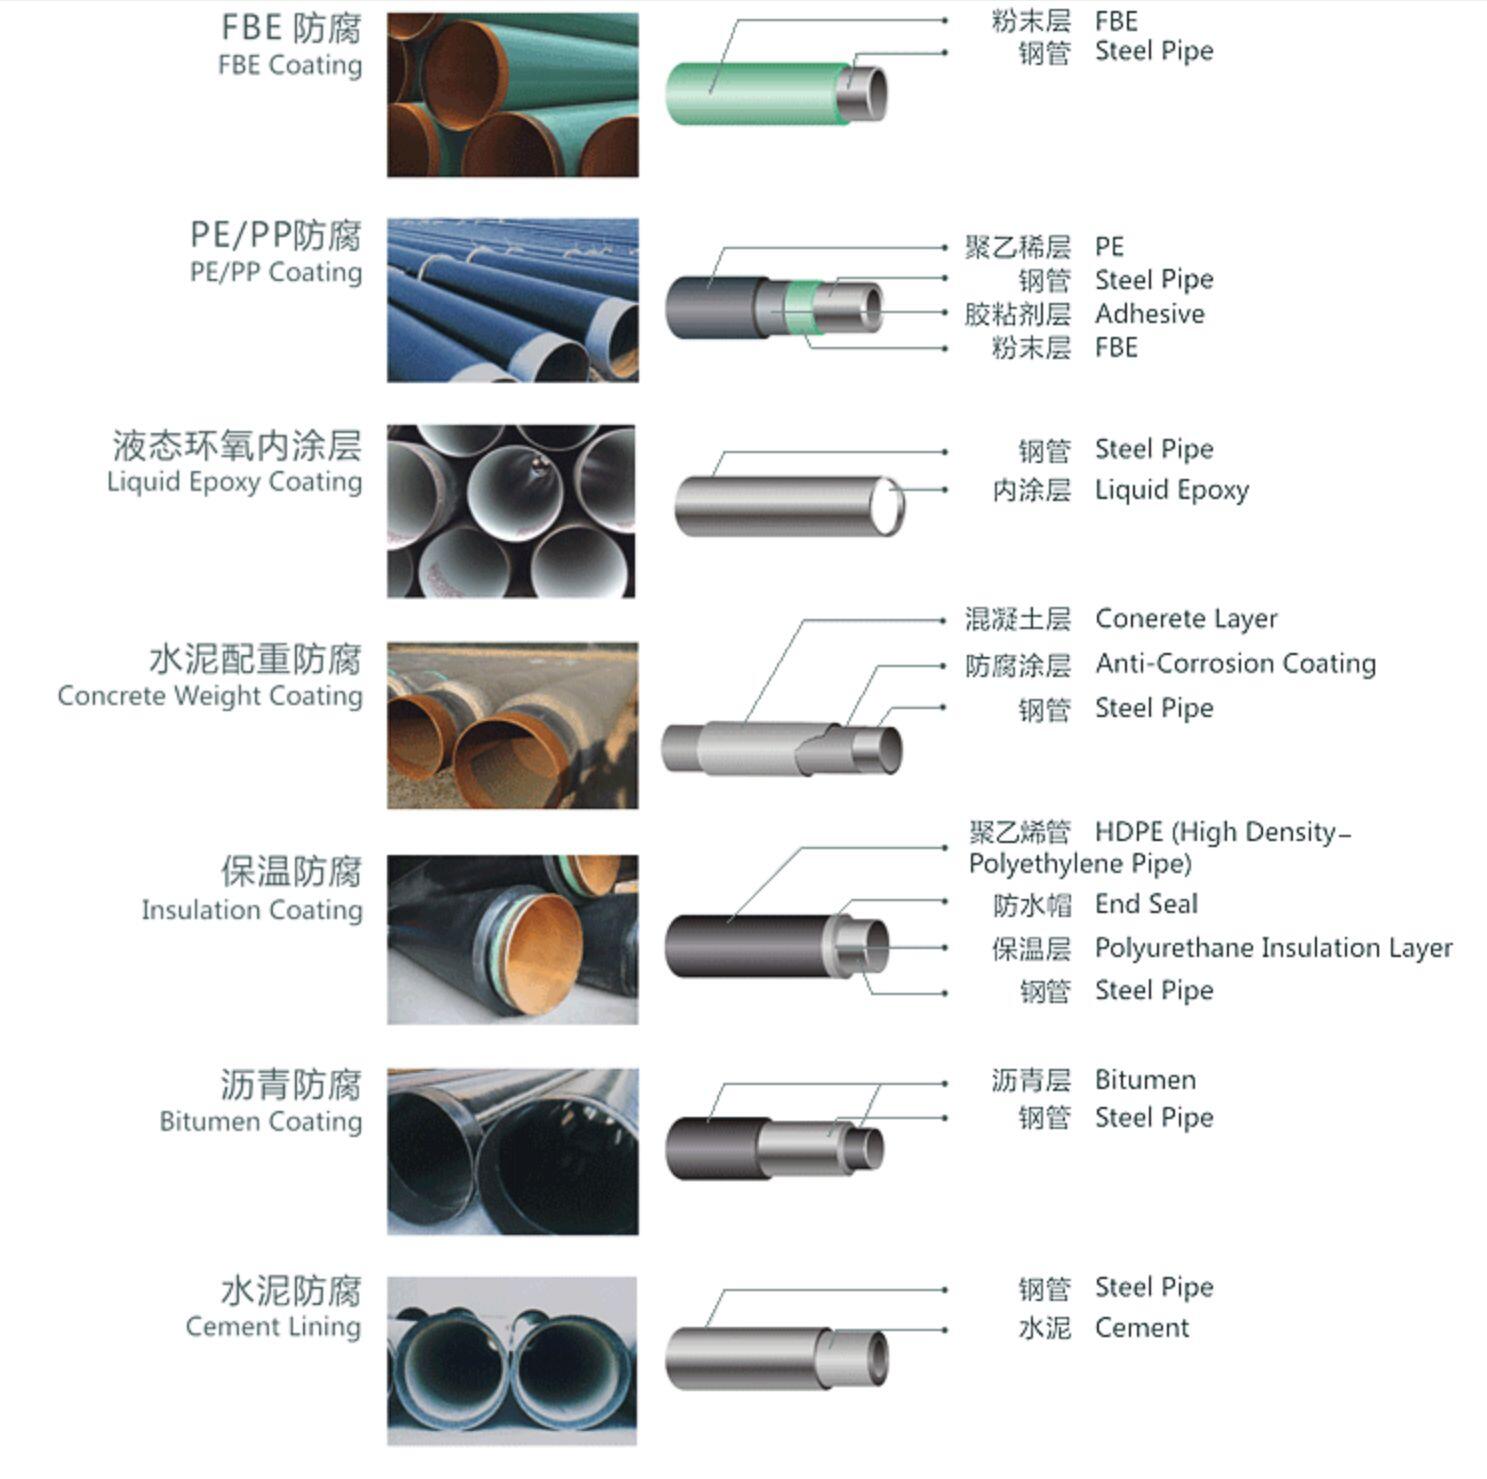 PMC steel pipe coating